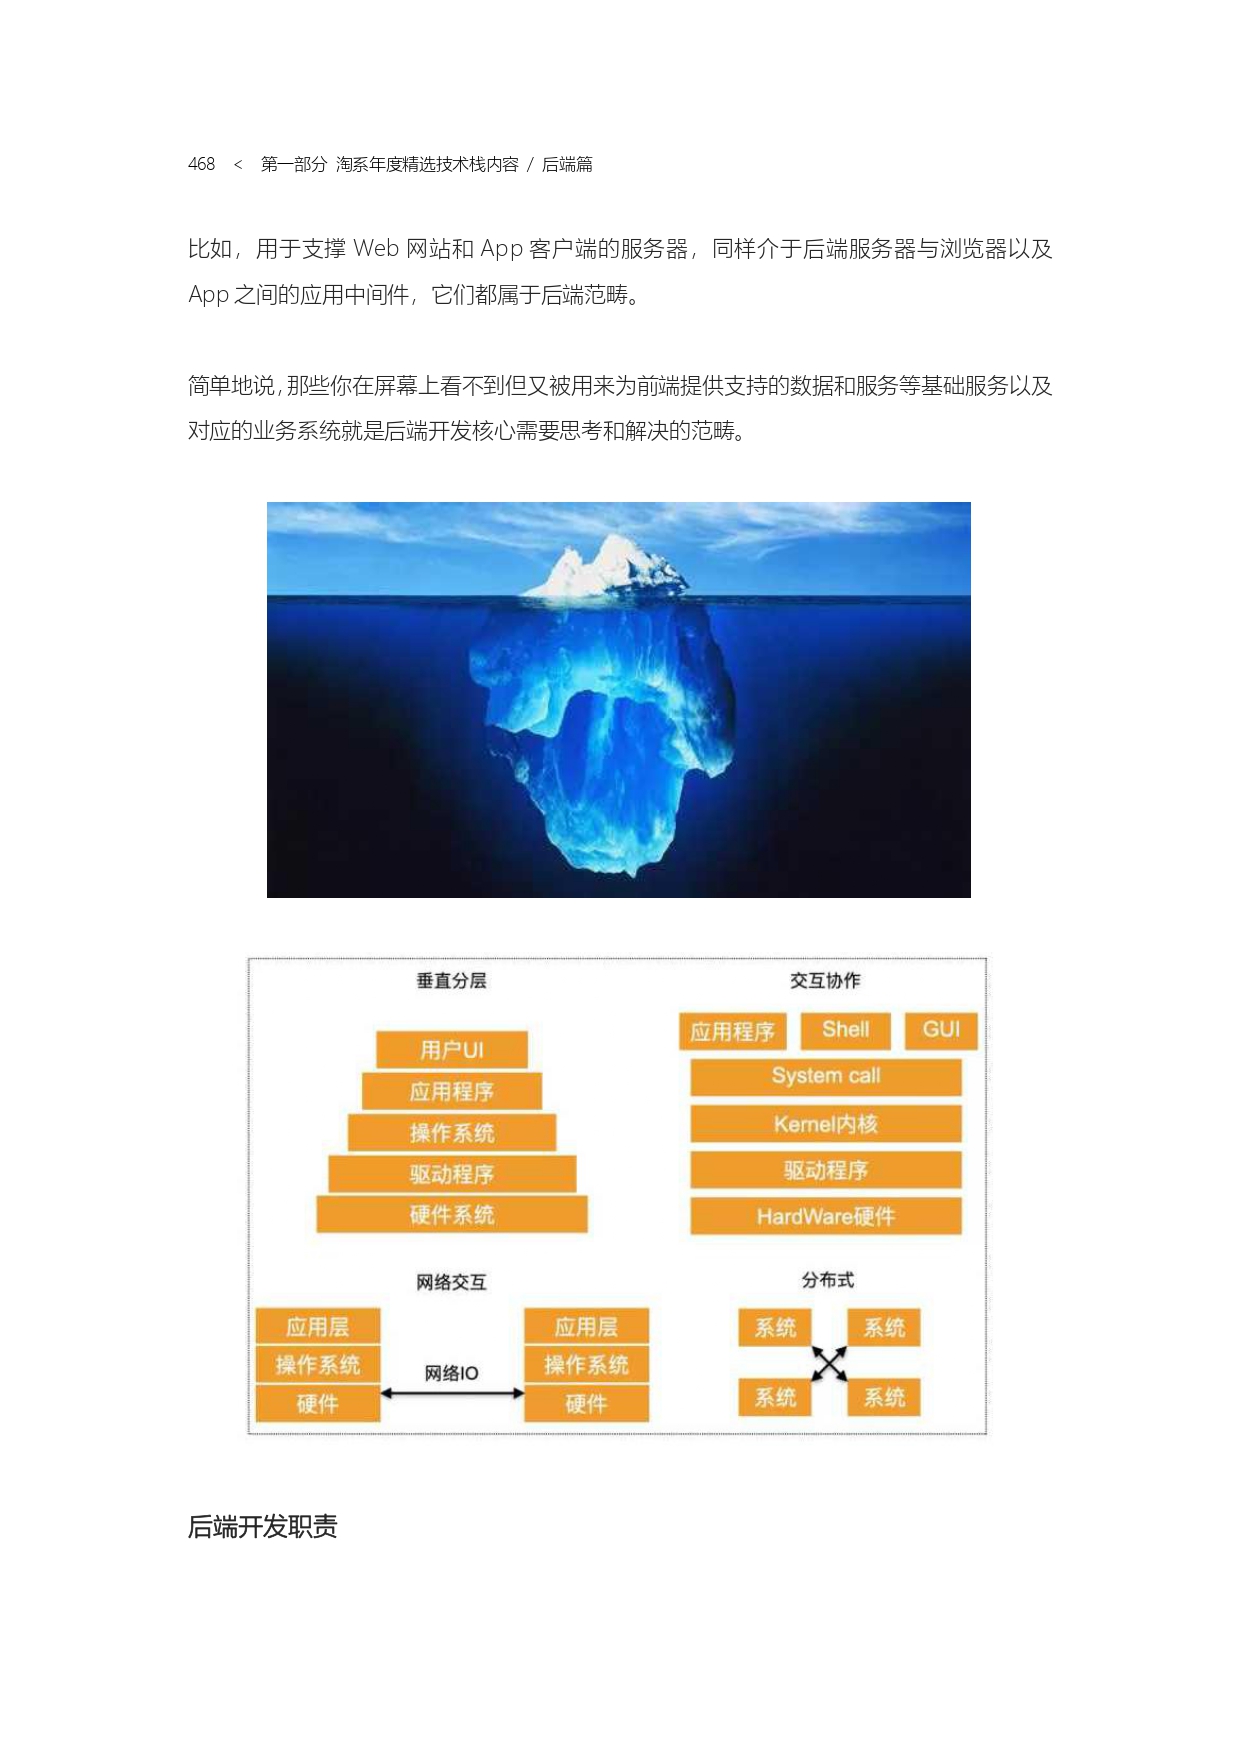 The Complete Works of Tao Technology 2020-1-570_page-0468.jpg